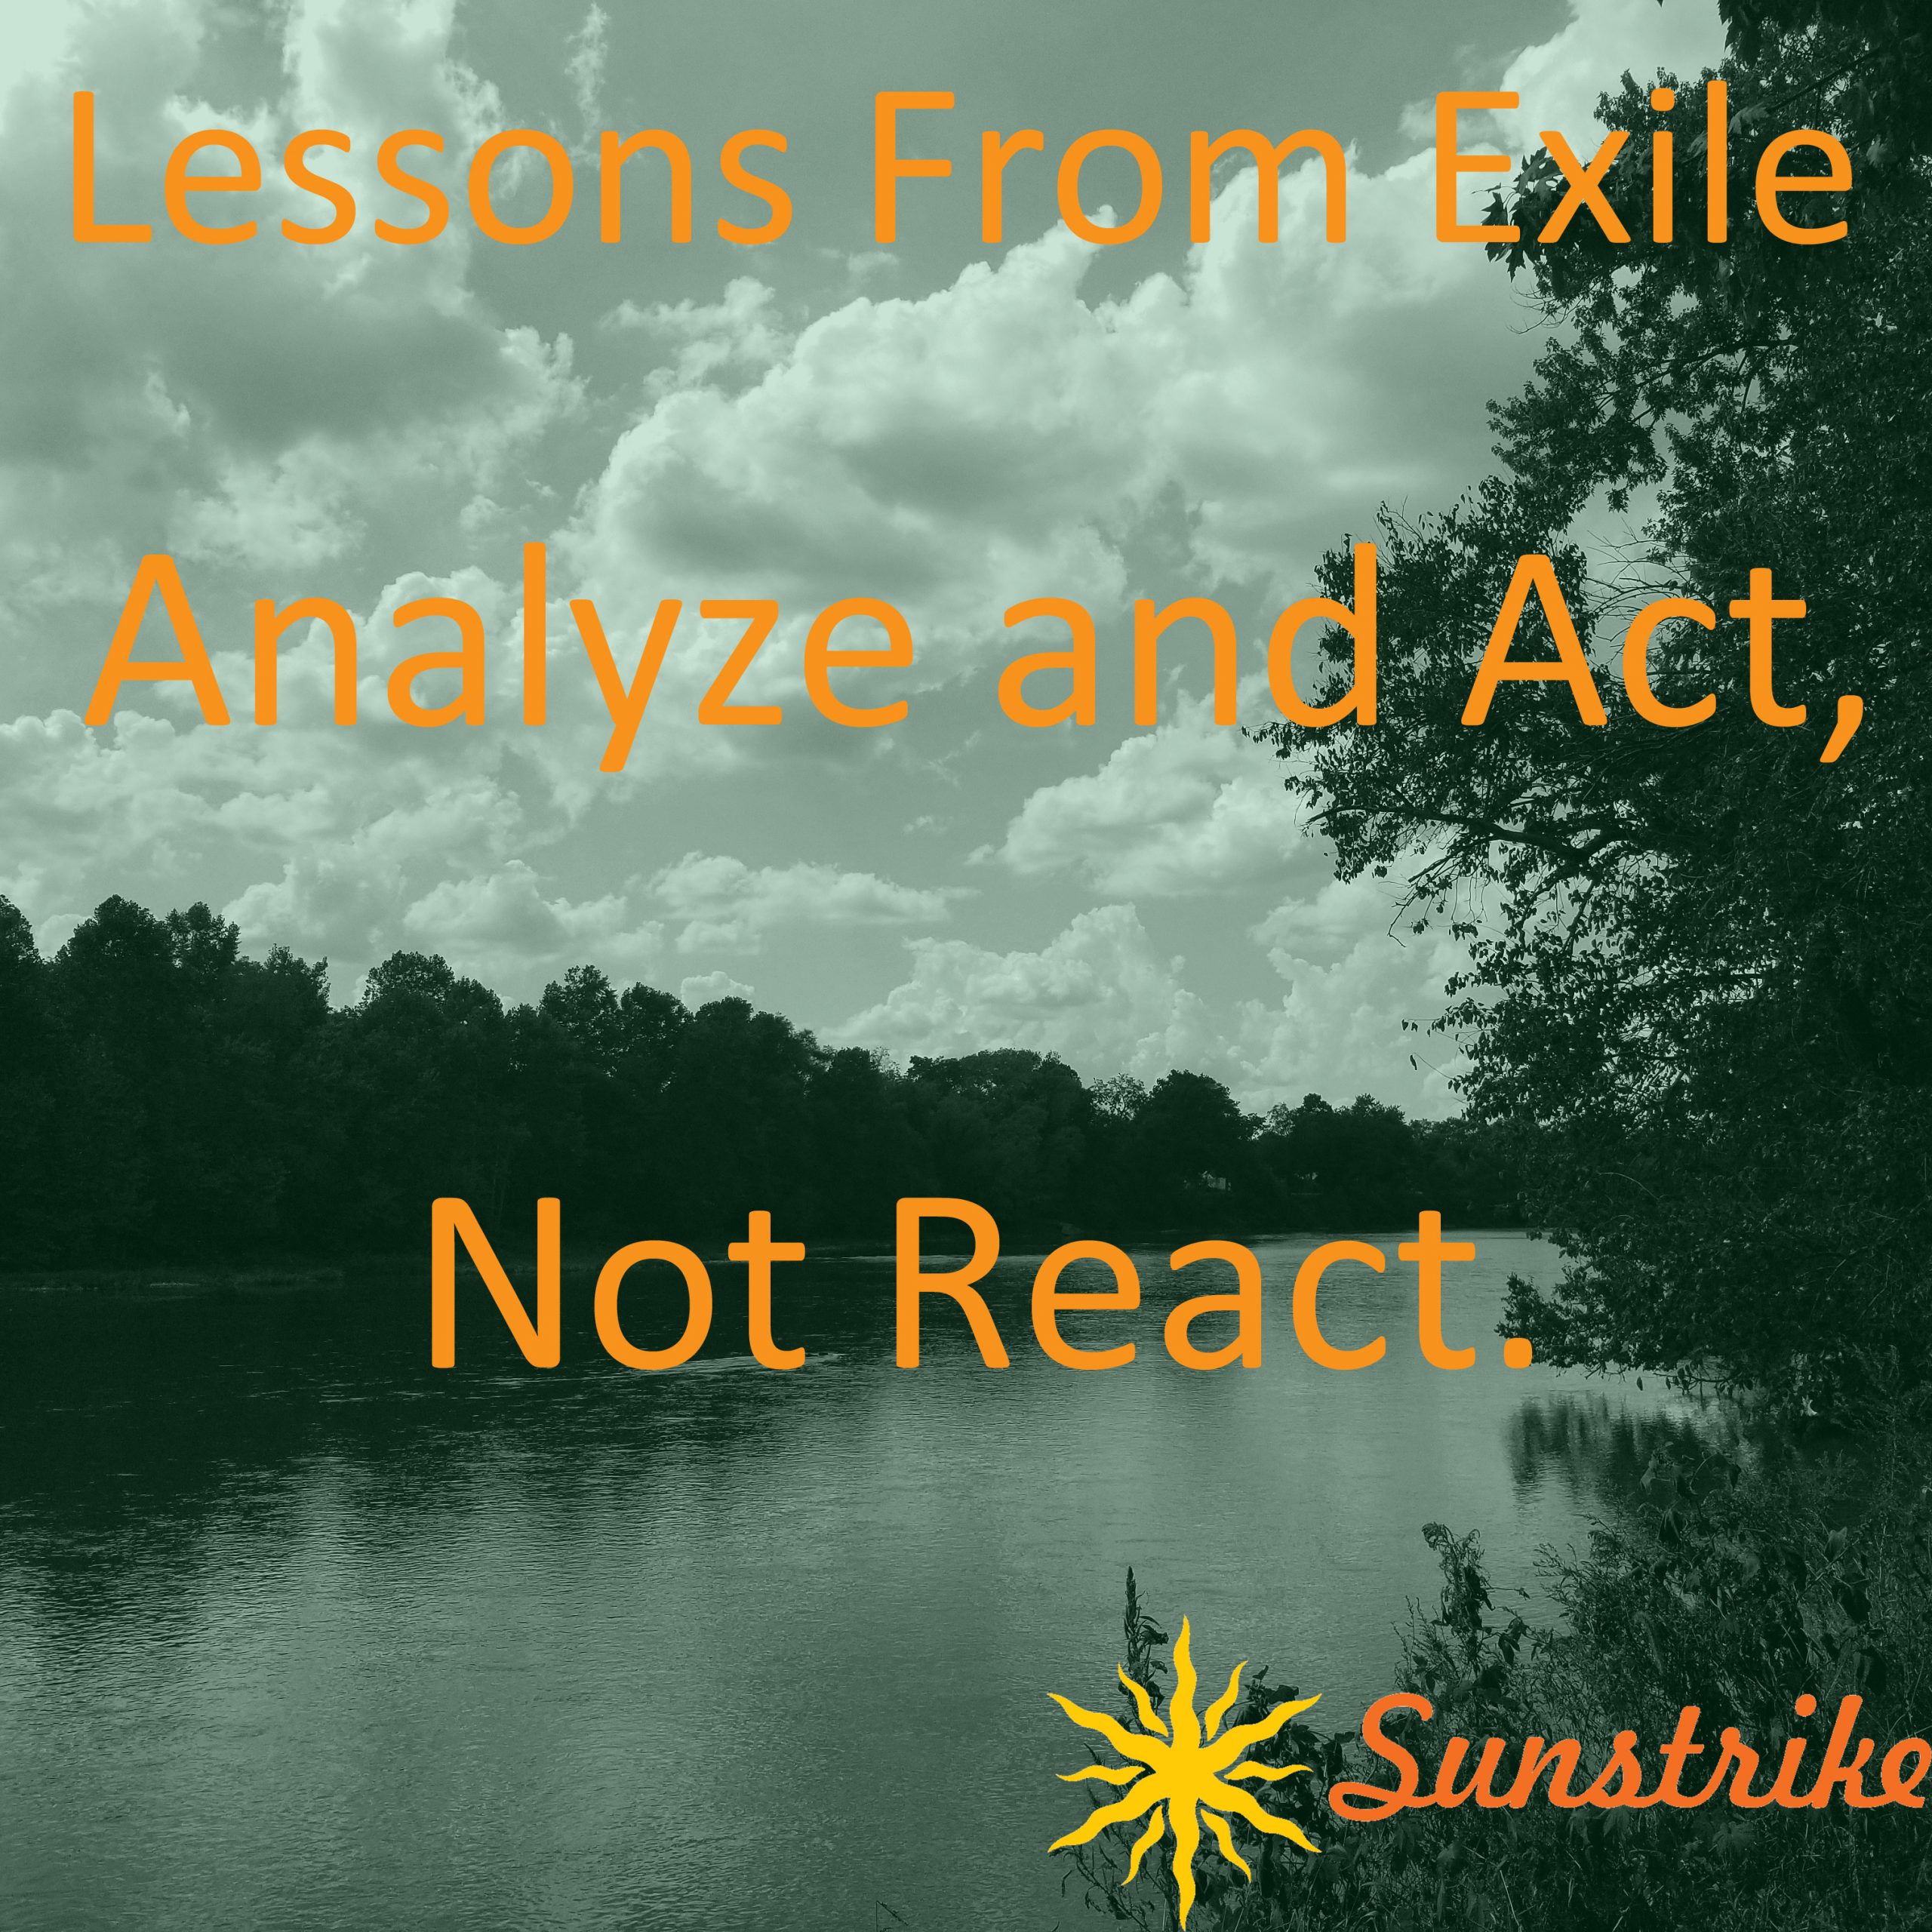 Lessons from Exile #58: Analyze and Act. Not React.